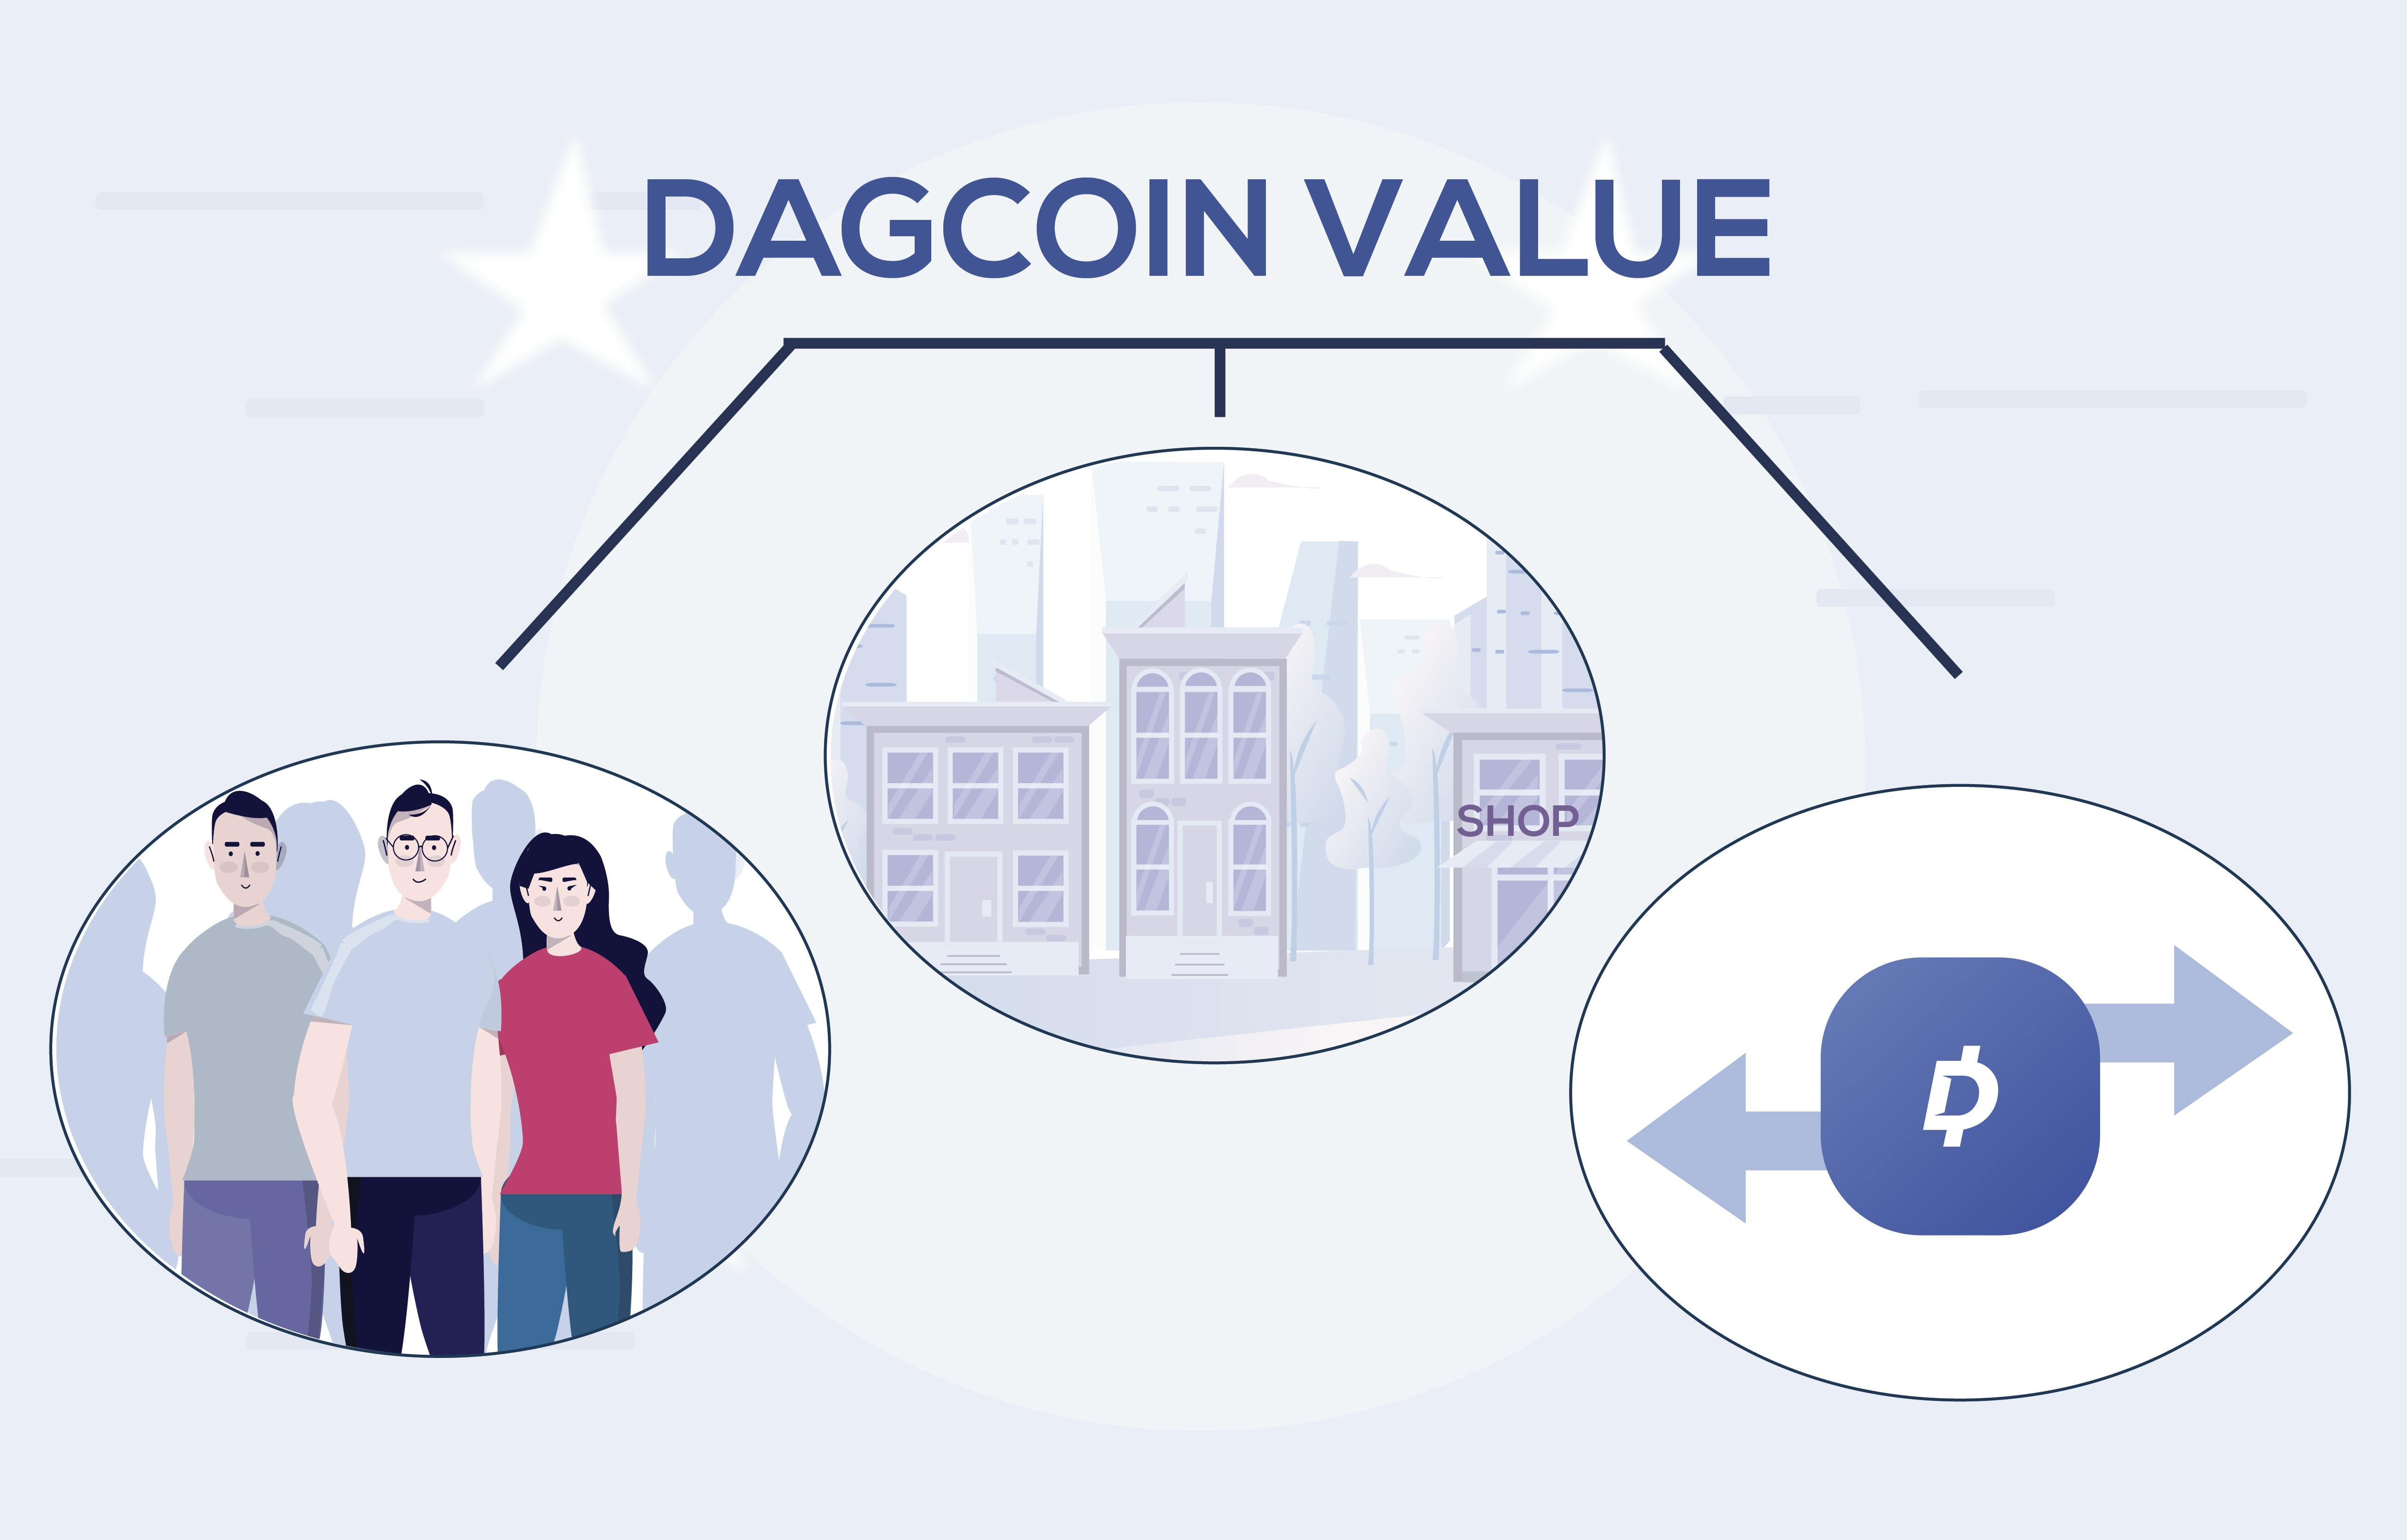 What Should The Value Of Dagcoin Be Based On?